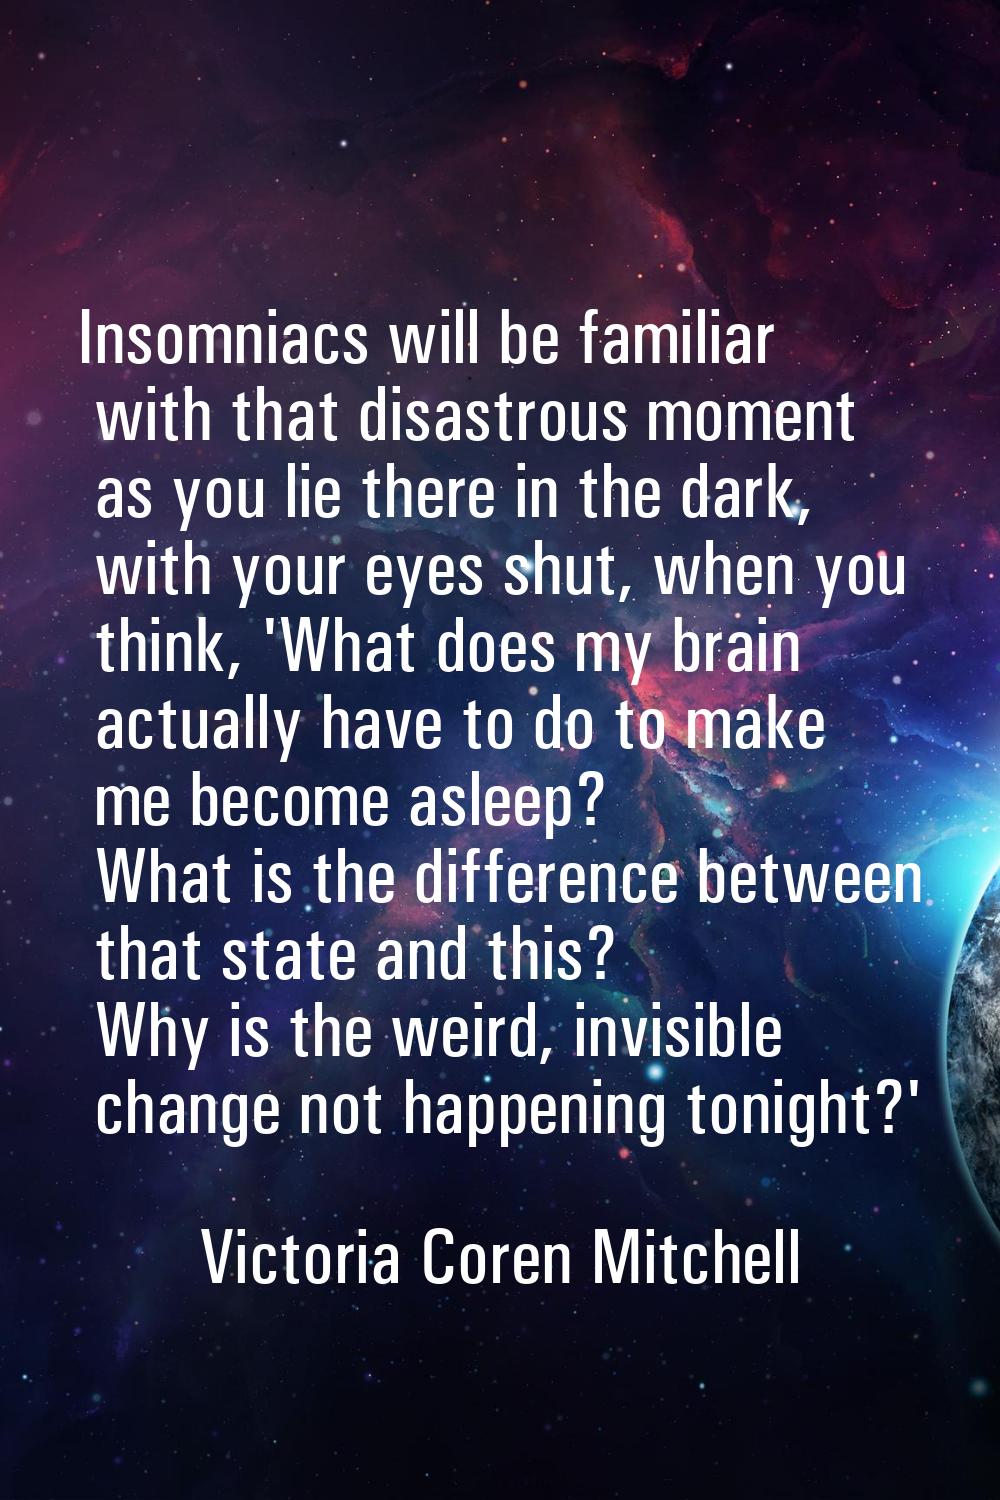 Insomniacs will be familiar with that disastrous moment as you lie there in the dark, with your eye